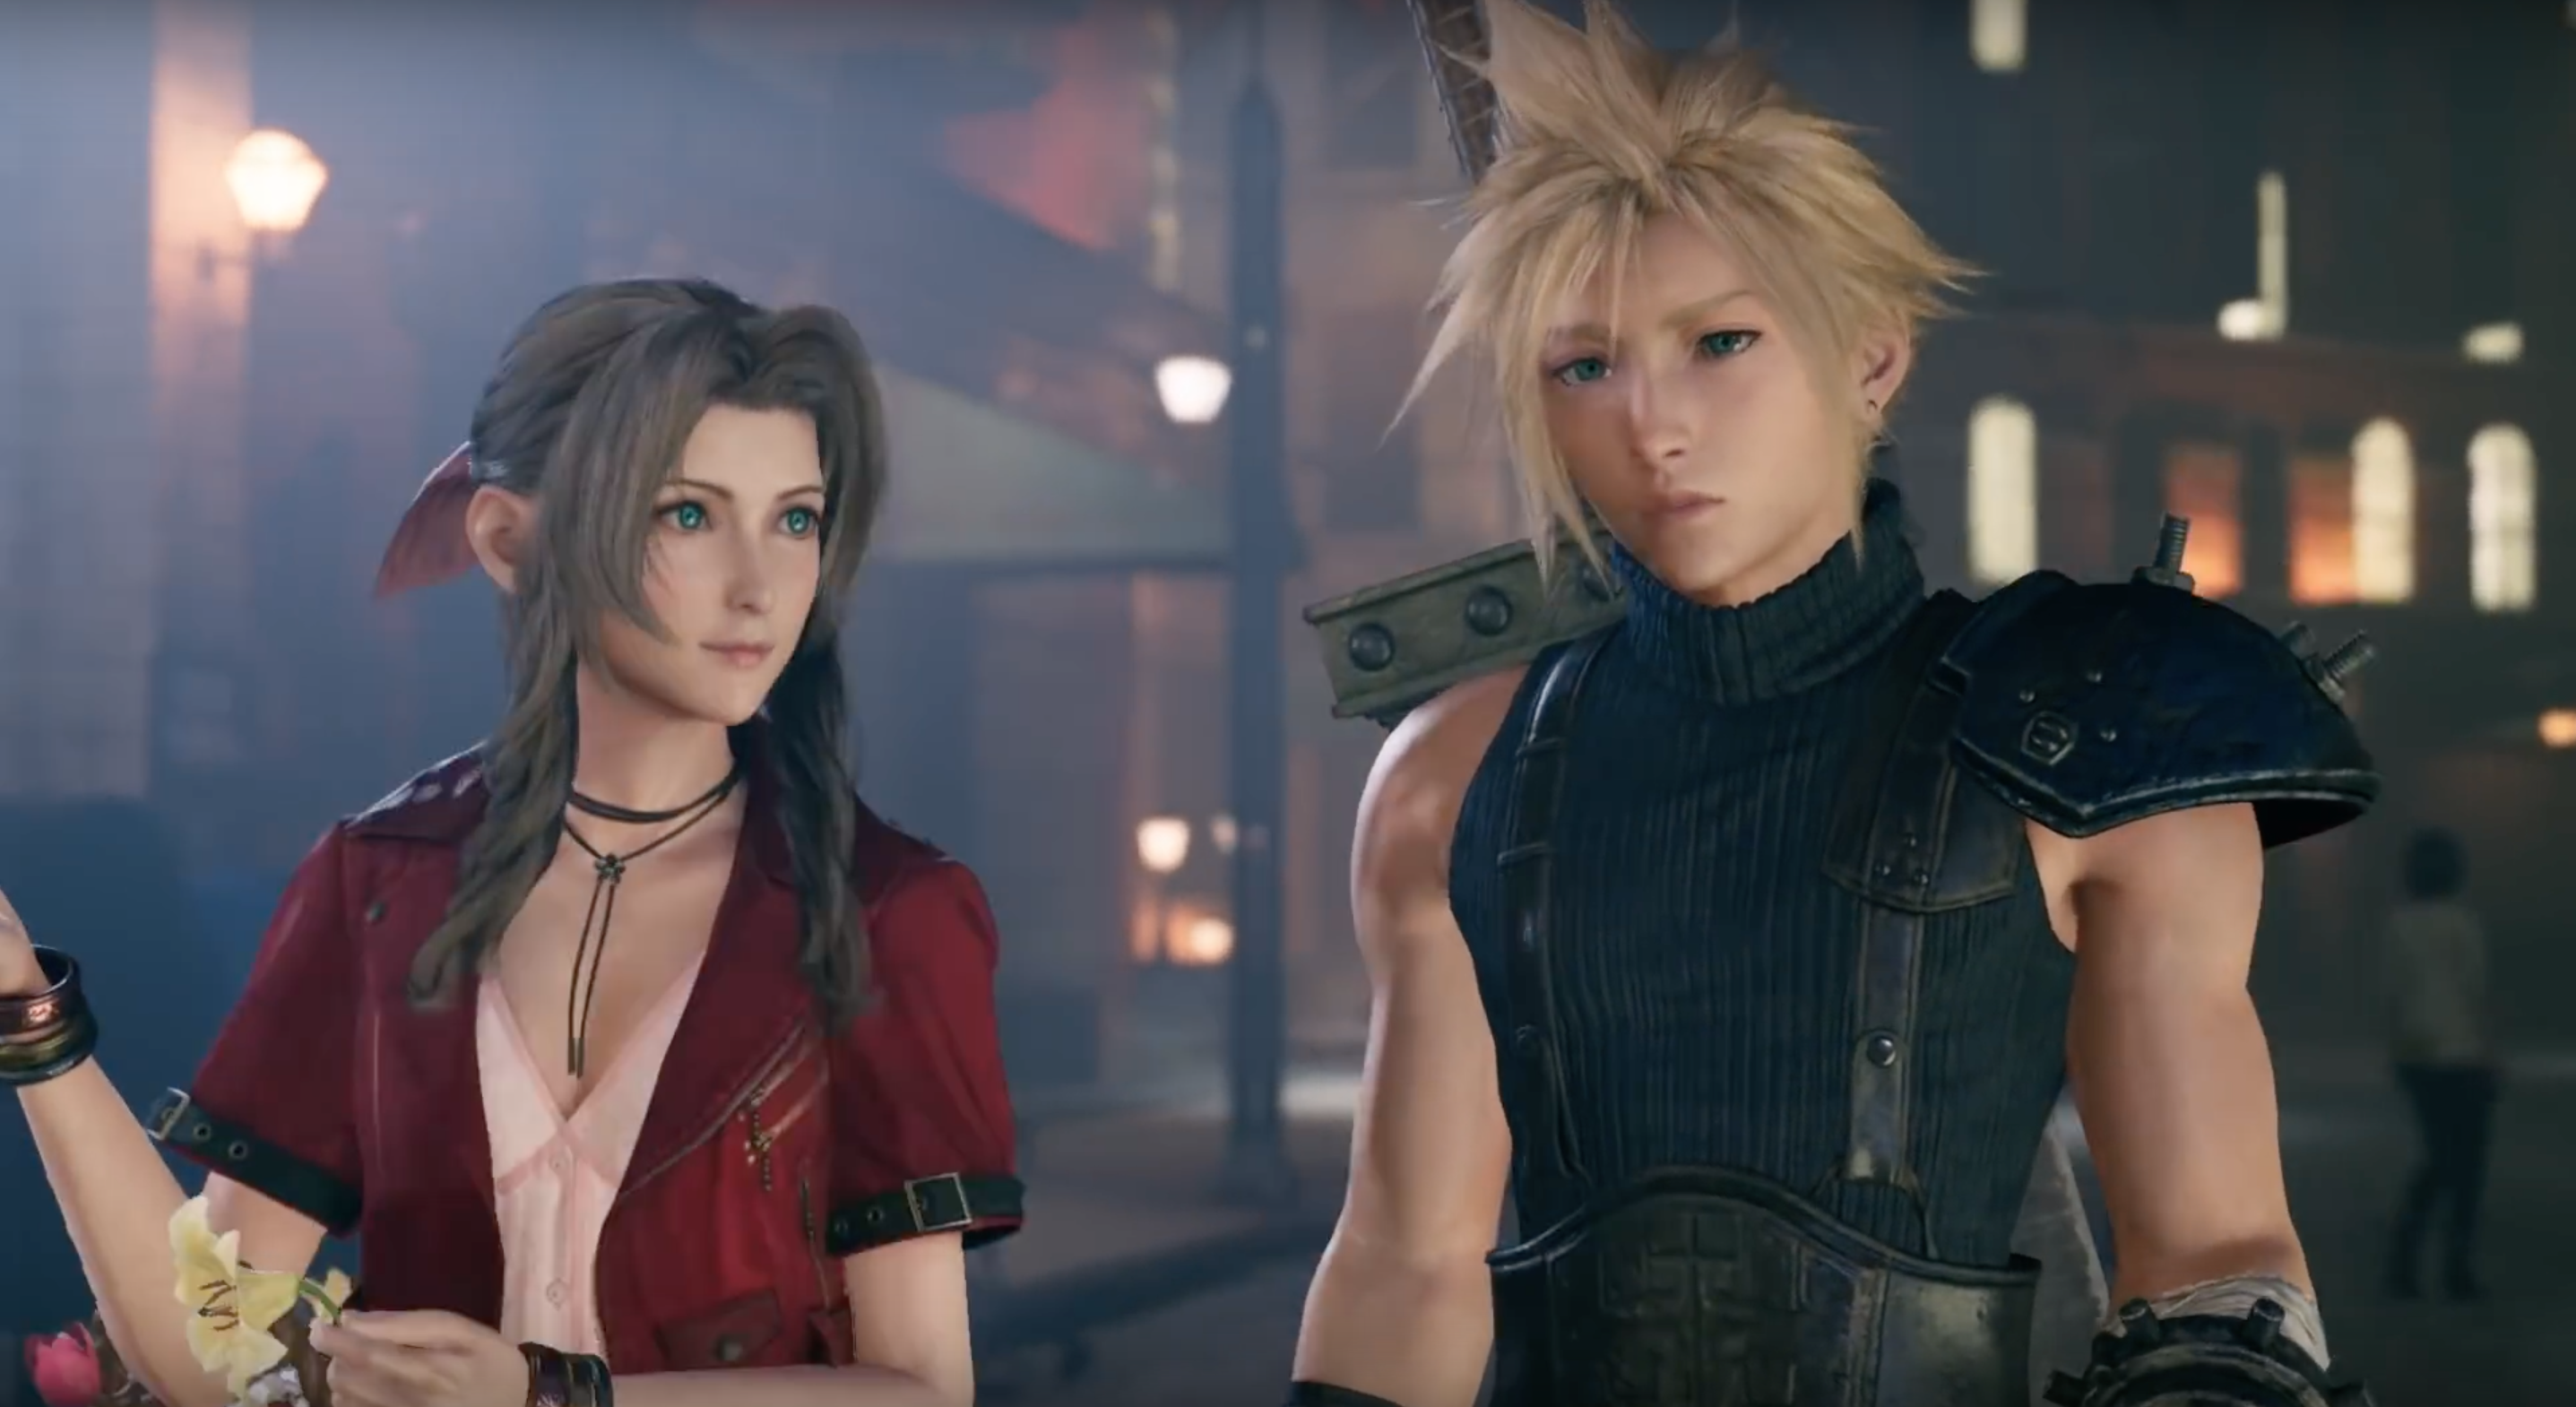 Who does cloud date in ff7?